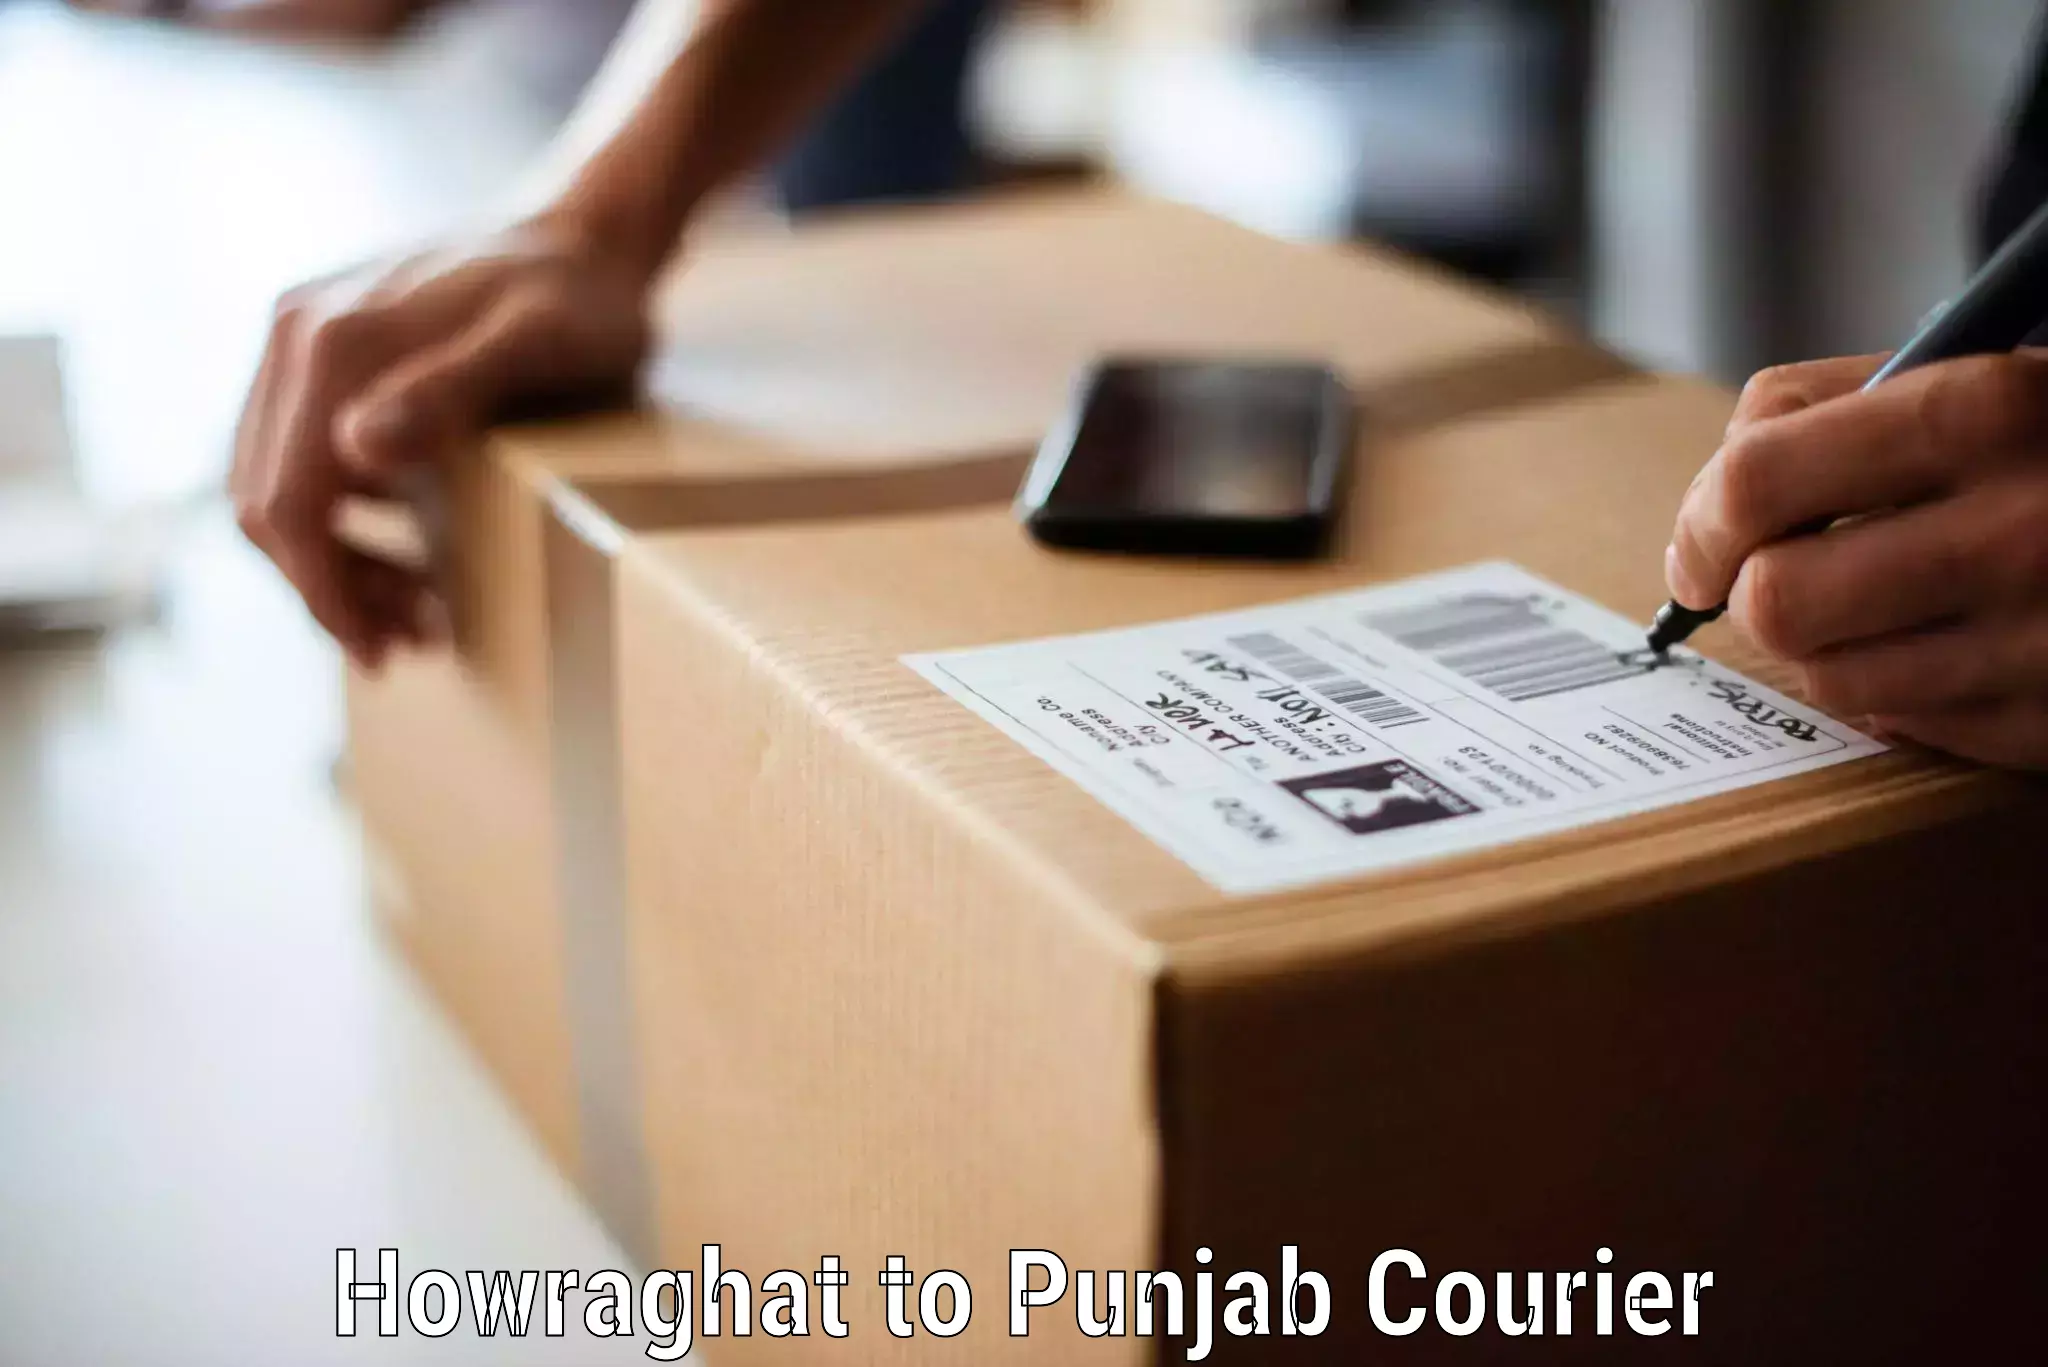 Trusted furniture transport Howraghat to Pathankot